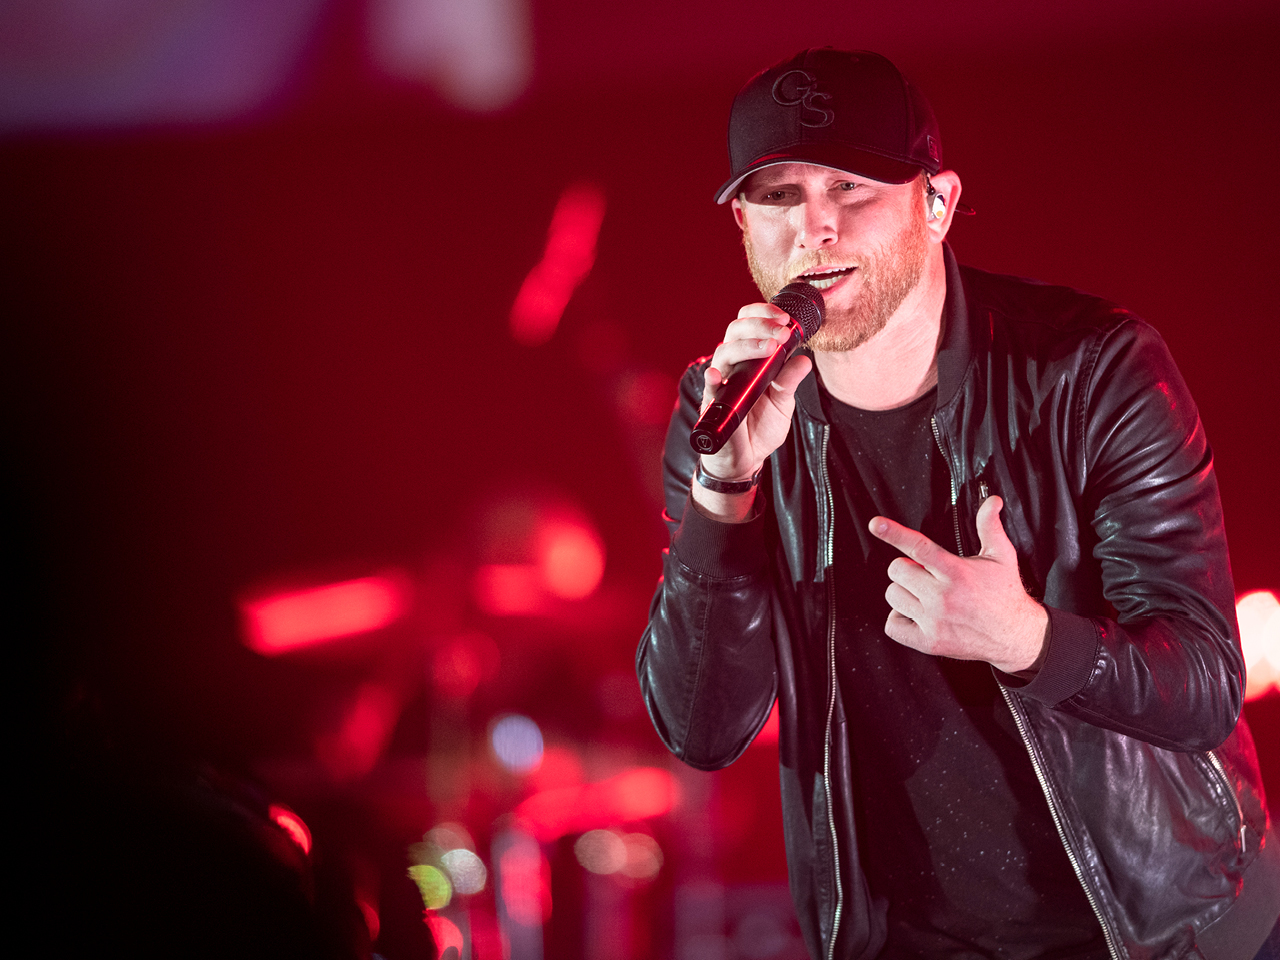 Platinum-selling country music singer-songwriter Cole Swindell is scheduled to perform private concerts for Diamond Resorts members in 2020.